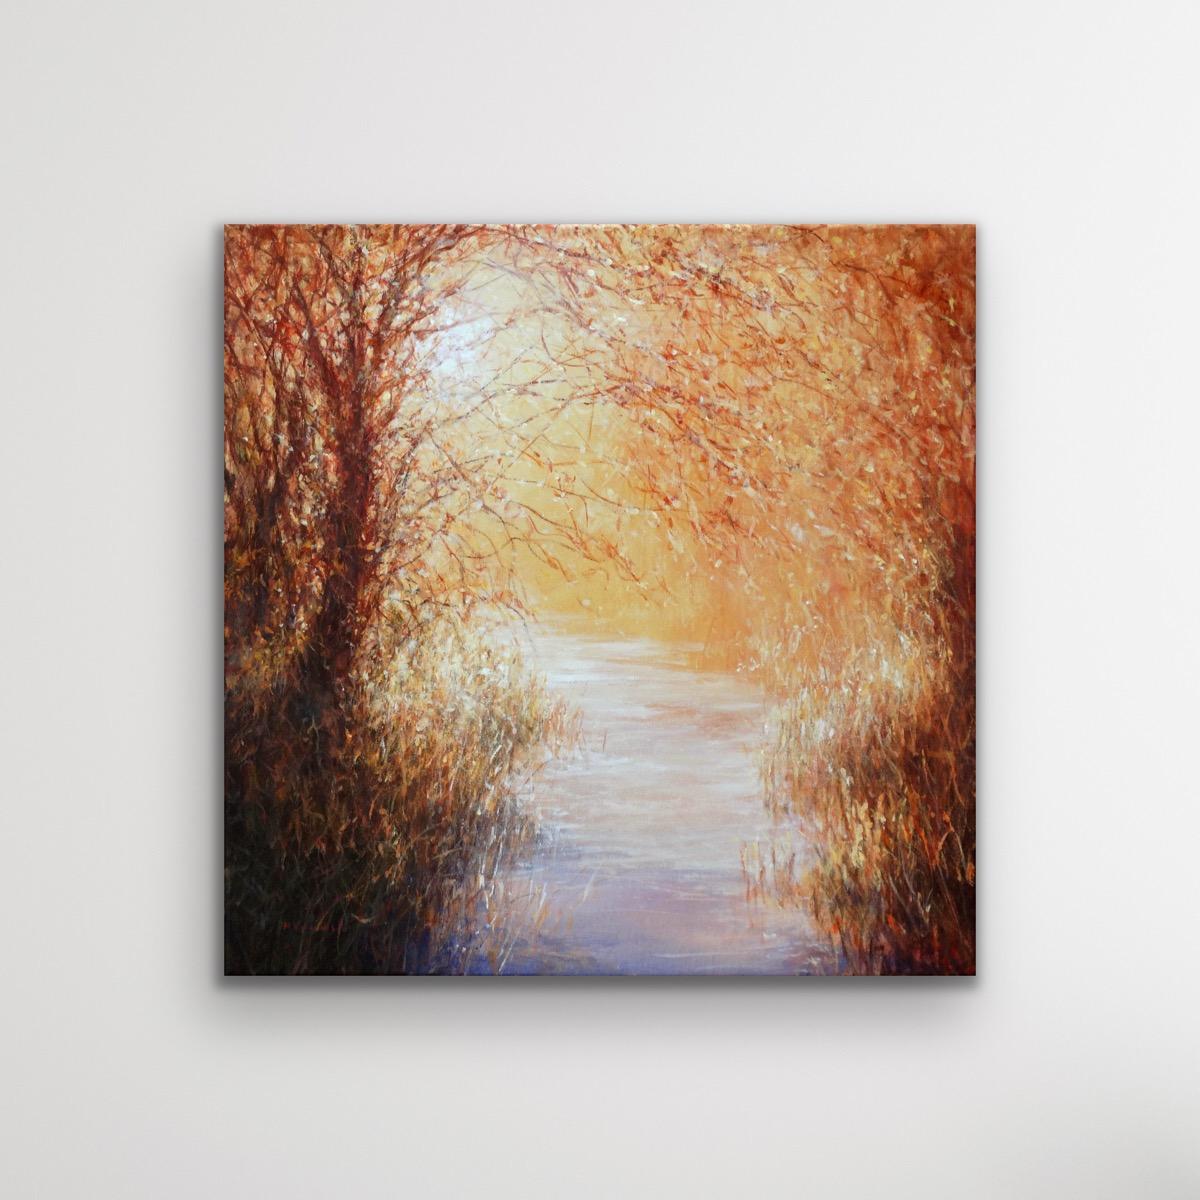 An impressionistic painting of a forest river. This painting is painted on the sides, ready to hang.

Discover more original artwork by Mariusz Kaldowski with Wychwood Art online and in our Oxfordshire art gallery. In 1987 he graduated with an MA